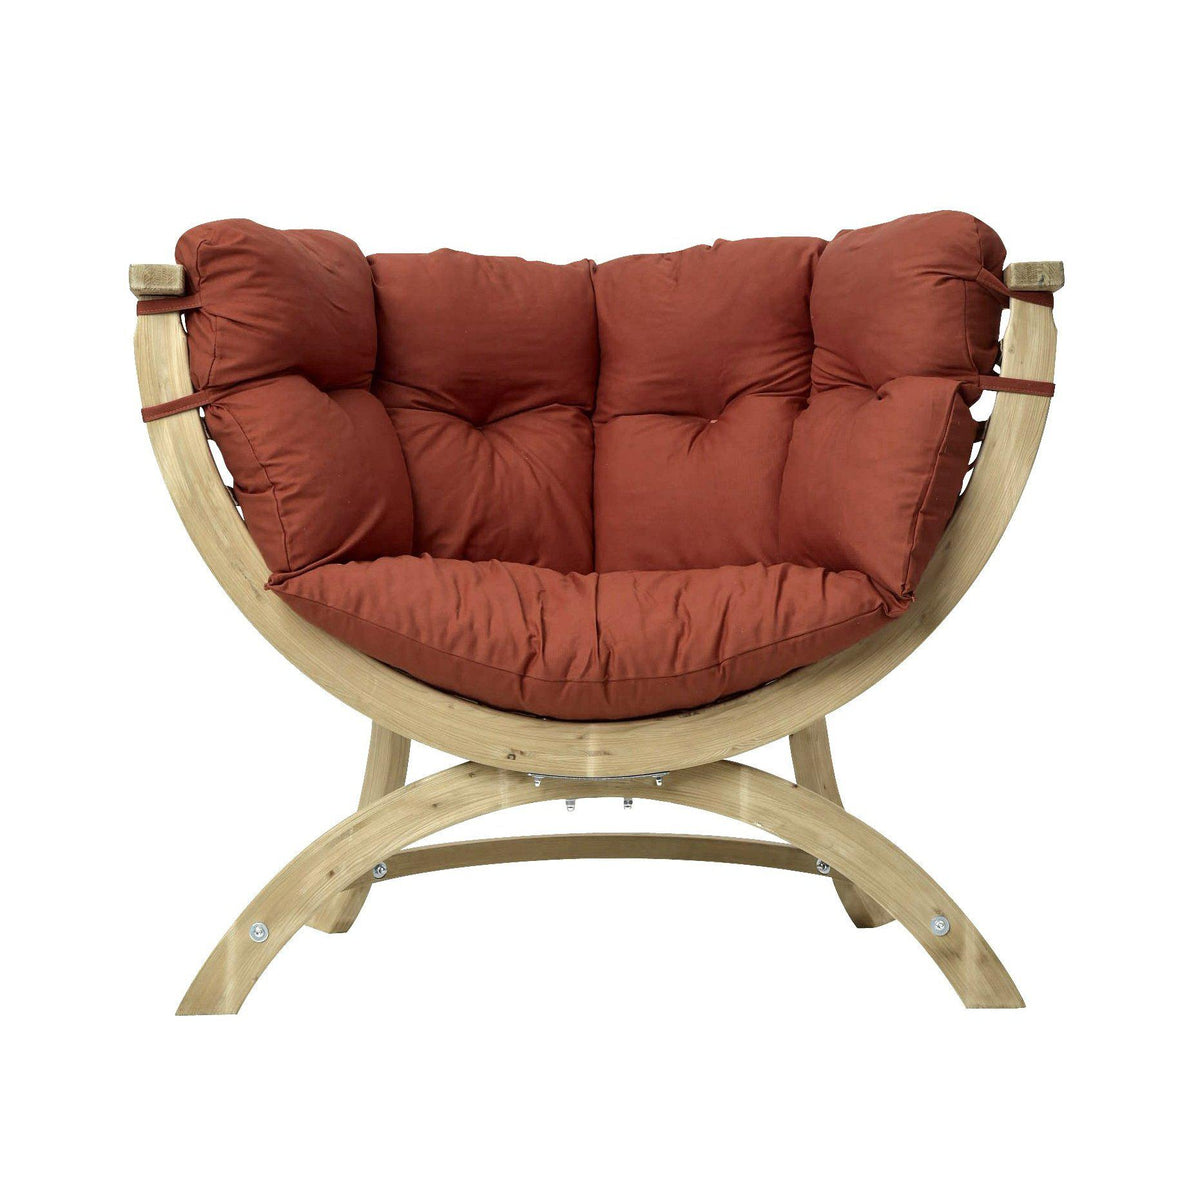 Siena UNO Chair, Terracotta, from Byer of Maine